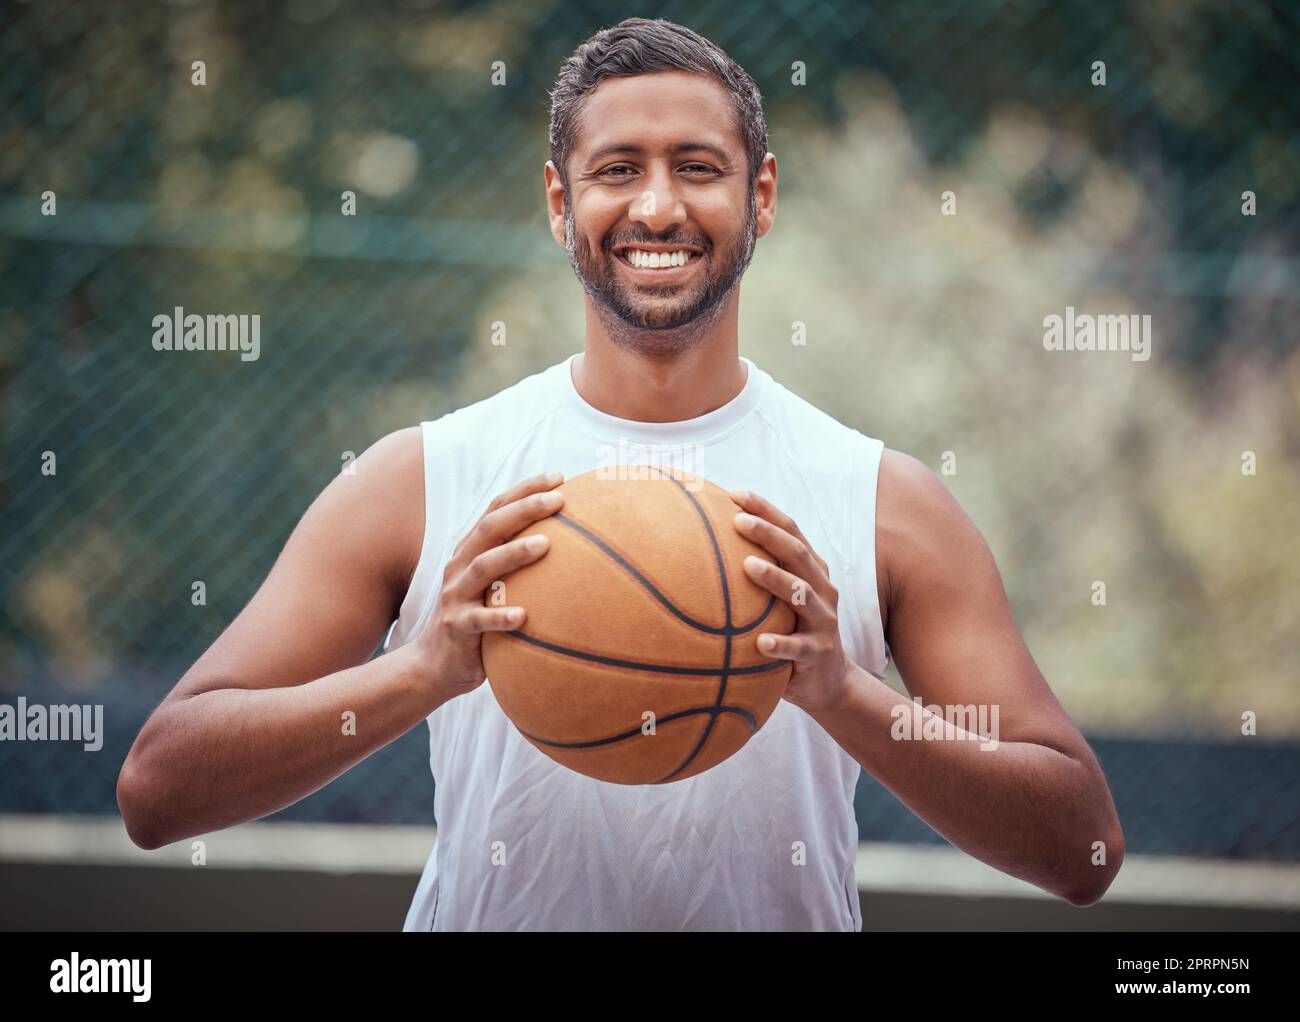 https://c8.alamy.com/comp/2PRPN5N/basketball-player-athlete-and-sports-man-with-ball-skill-and-hobby-for-playing-game-fun-match-or-competition-outdoors-portrait-of-happy-fitness-and-indian-man-goal-motivation-and-ready-to-win-2PRPN5N.jpg